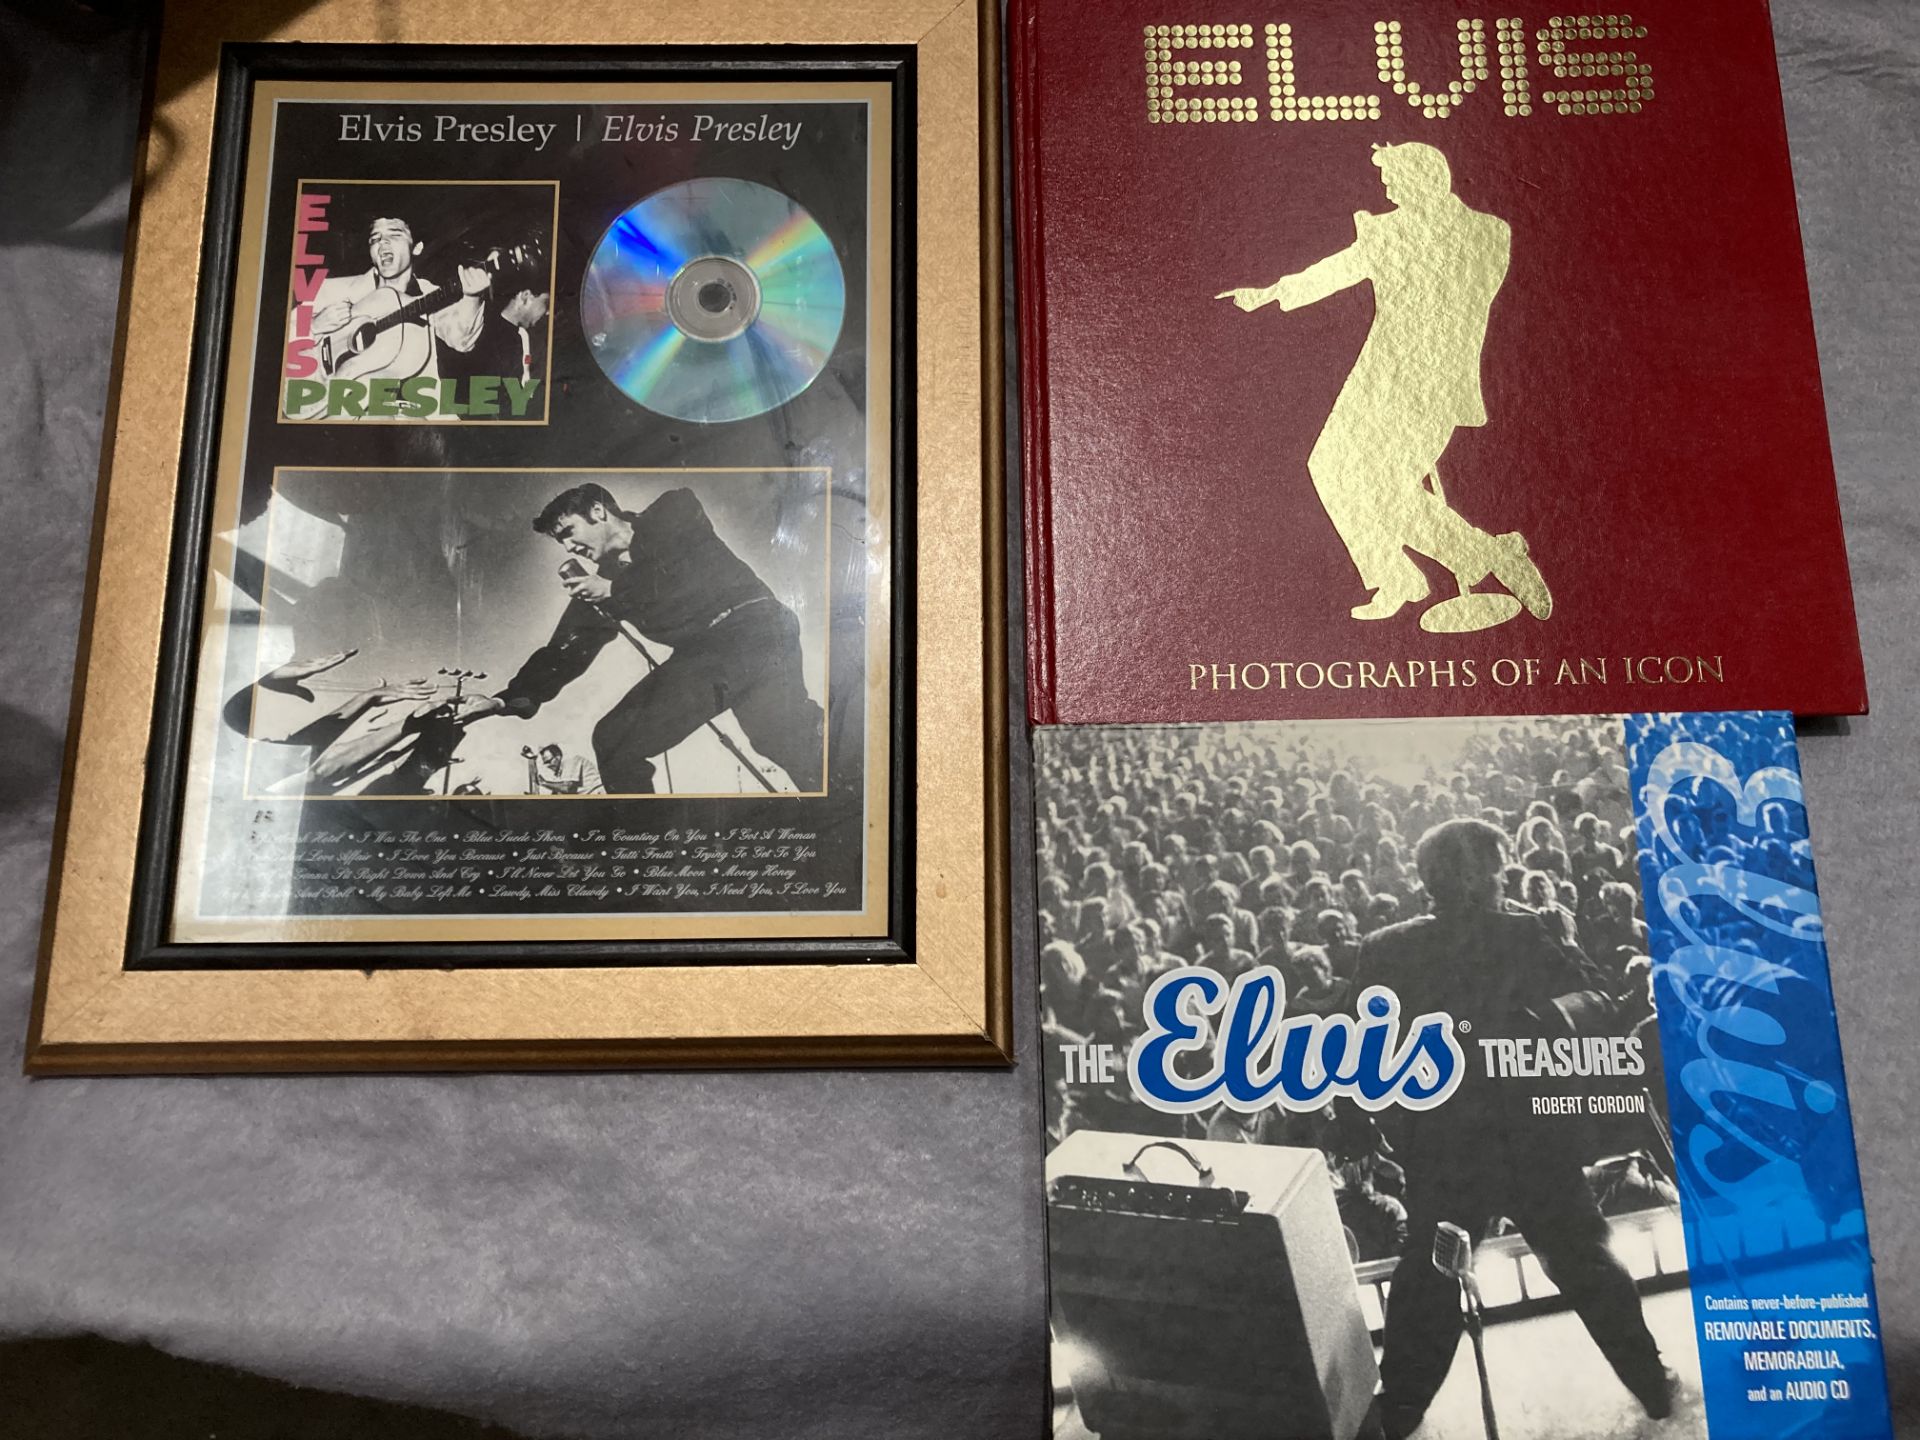 Framed Elvis Presley picture and CD and a collectors Elvis Treasure book/annual by Robert Gordon